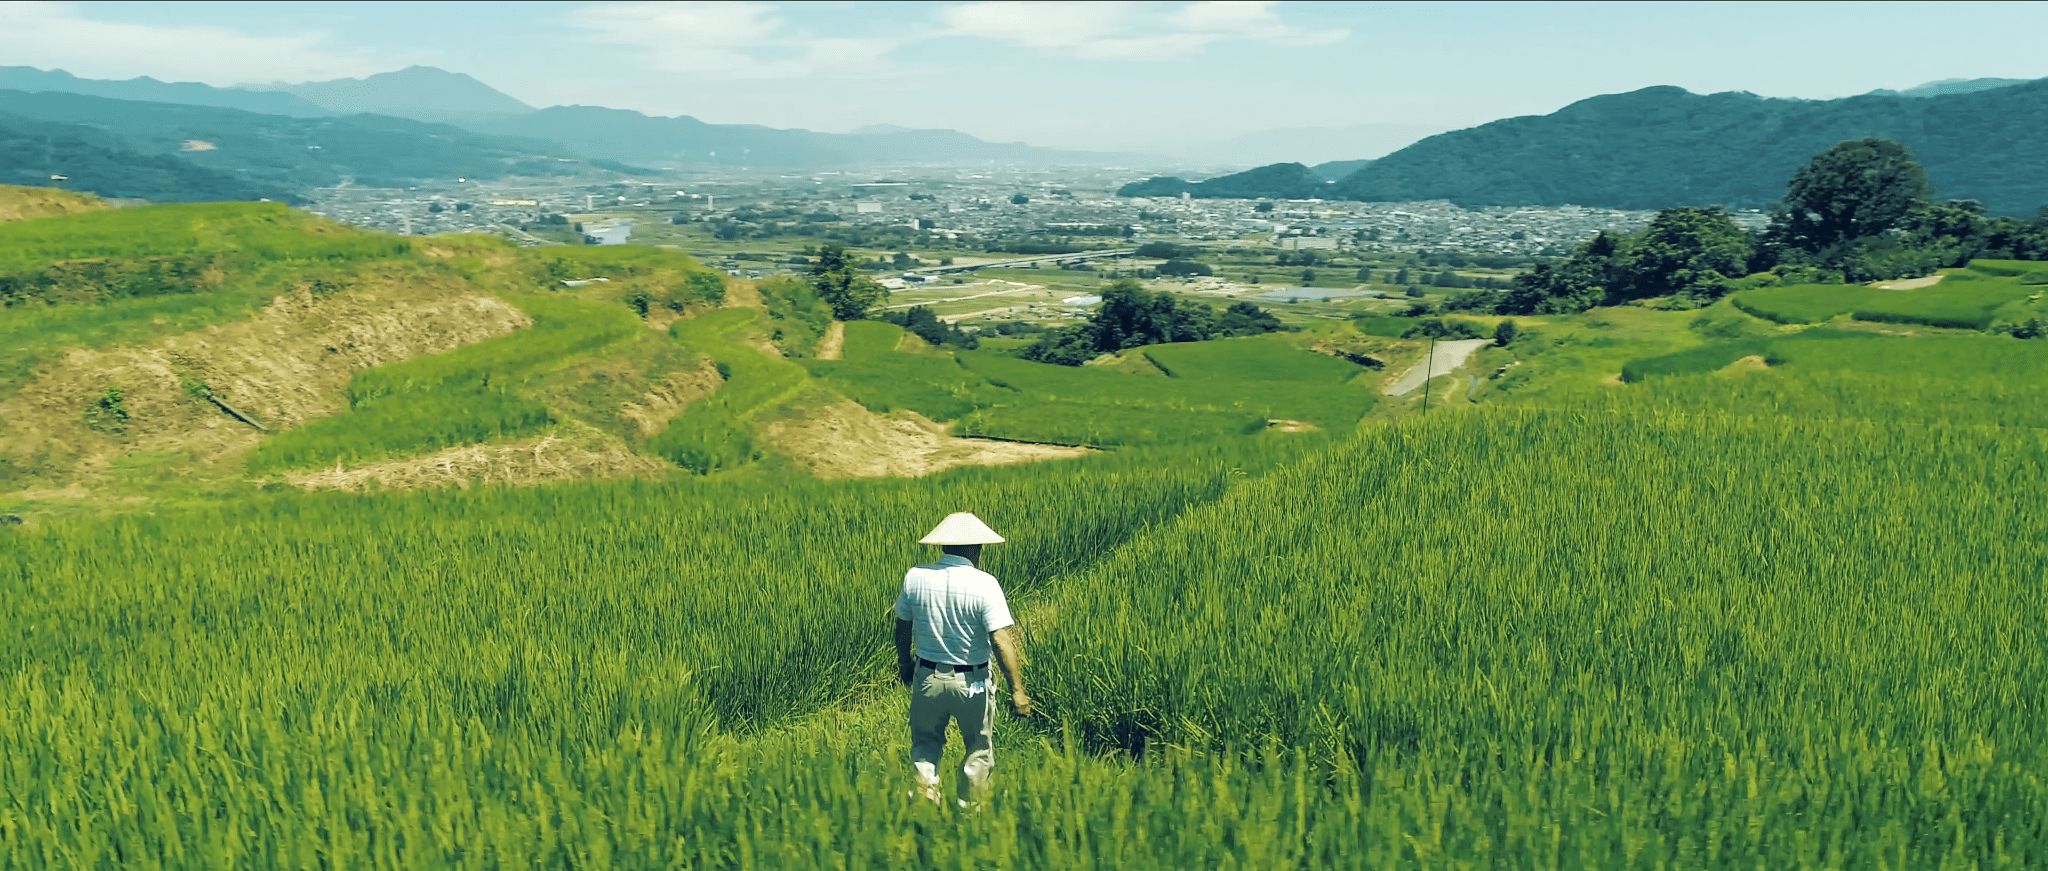 magnificent rice fields